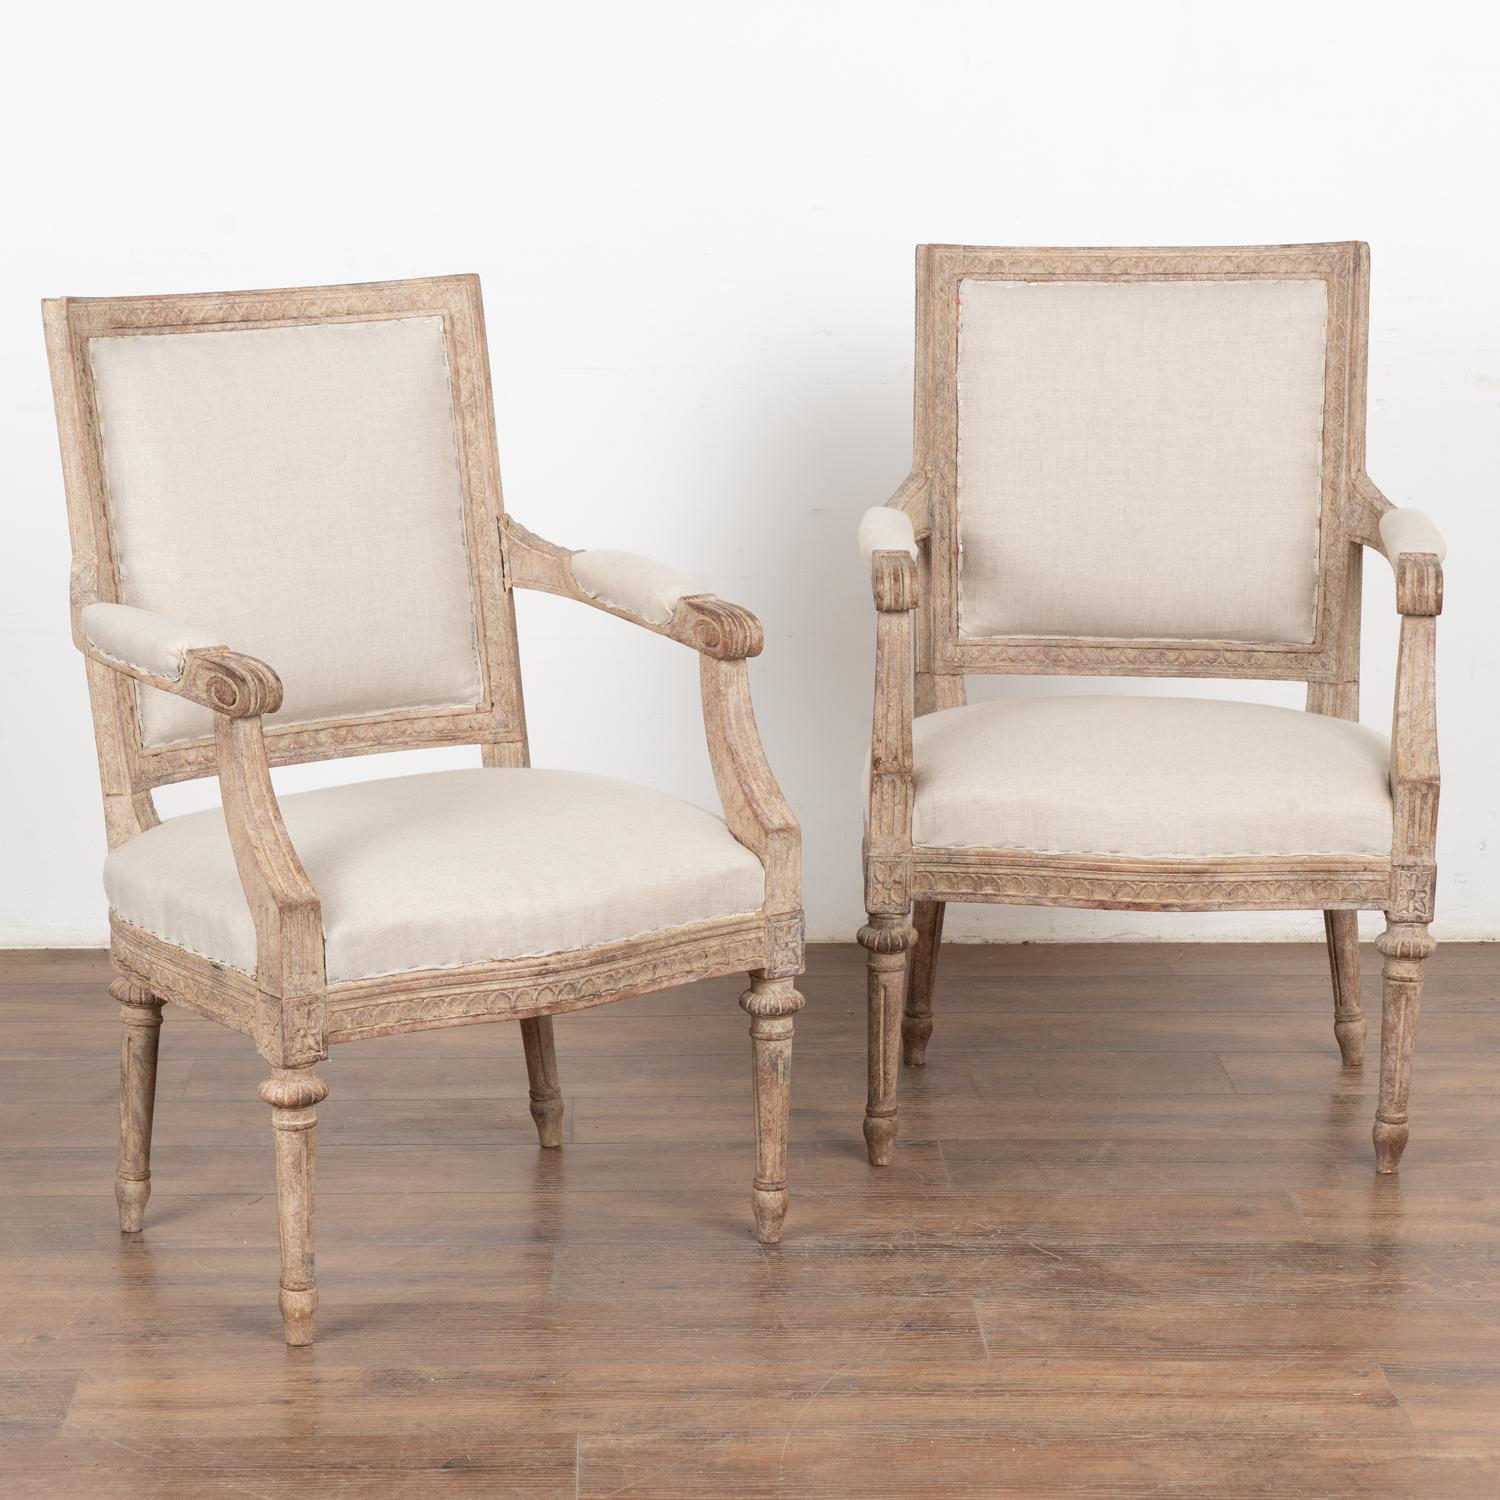 Pair, Swedish white painted armchairs with carved details along edges, top of back and bottom of seat; turned fluted legs.
The newer, professionally applied antique white painted finish is typical of the 1900's era in Sweden. It has been distressed